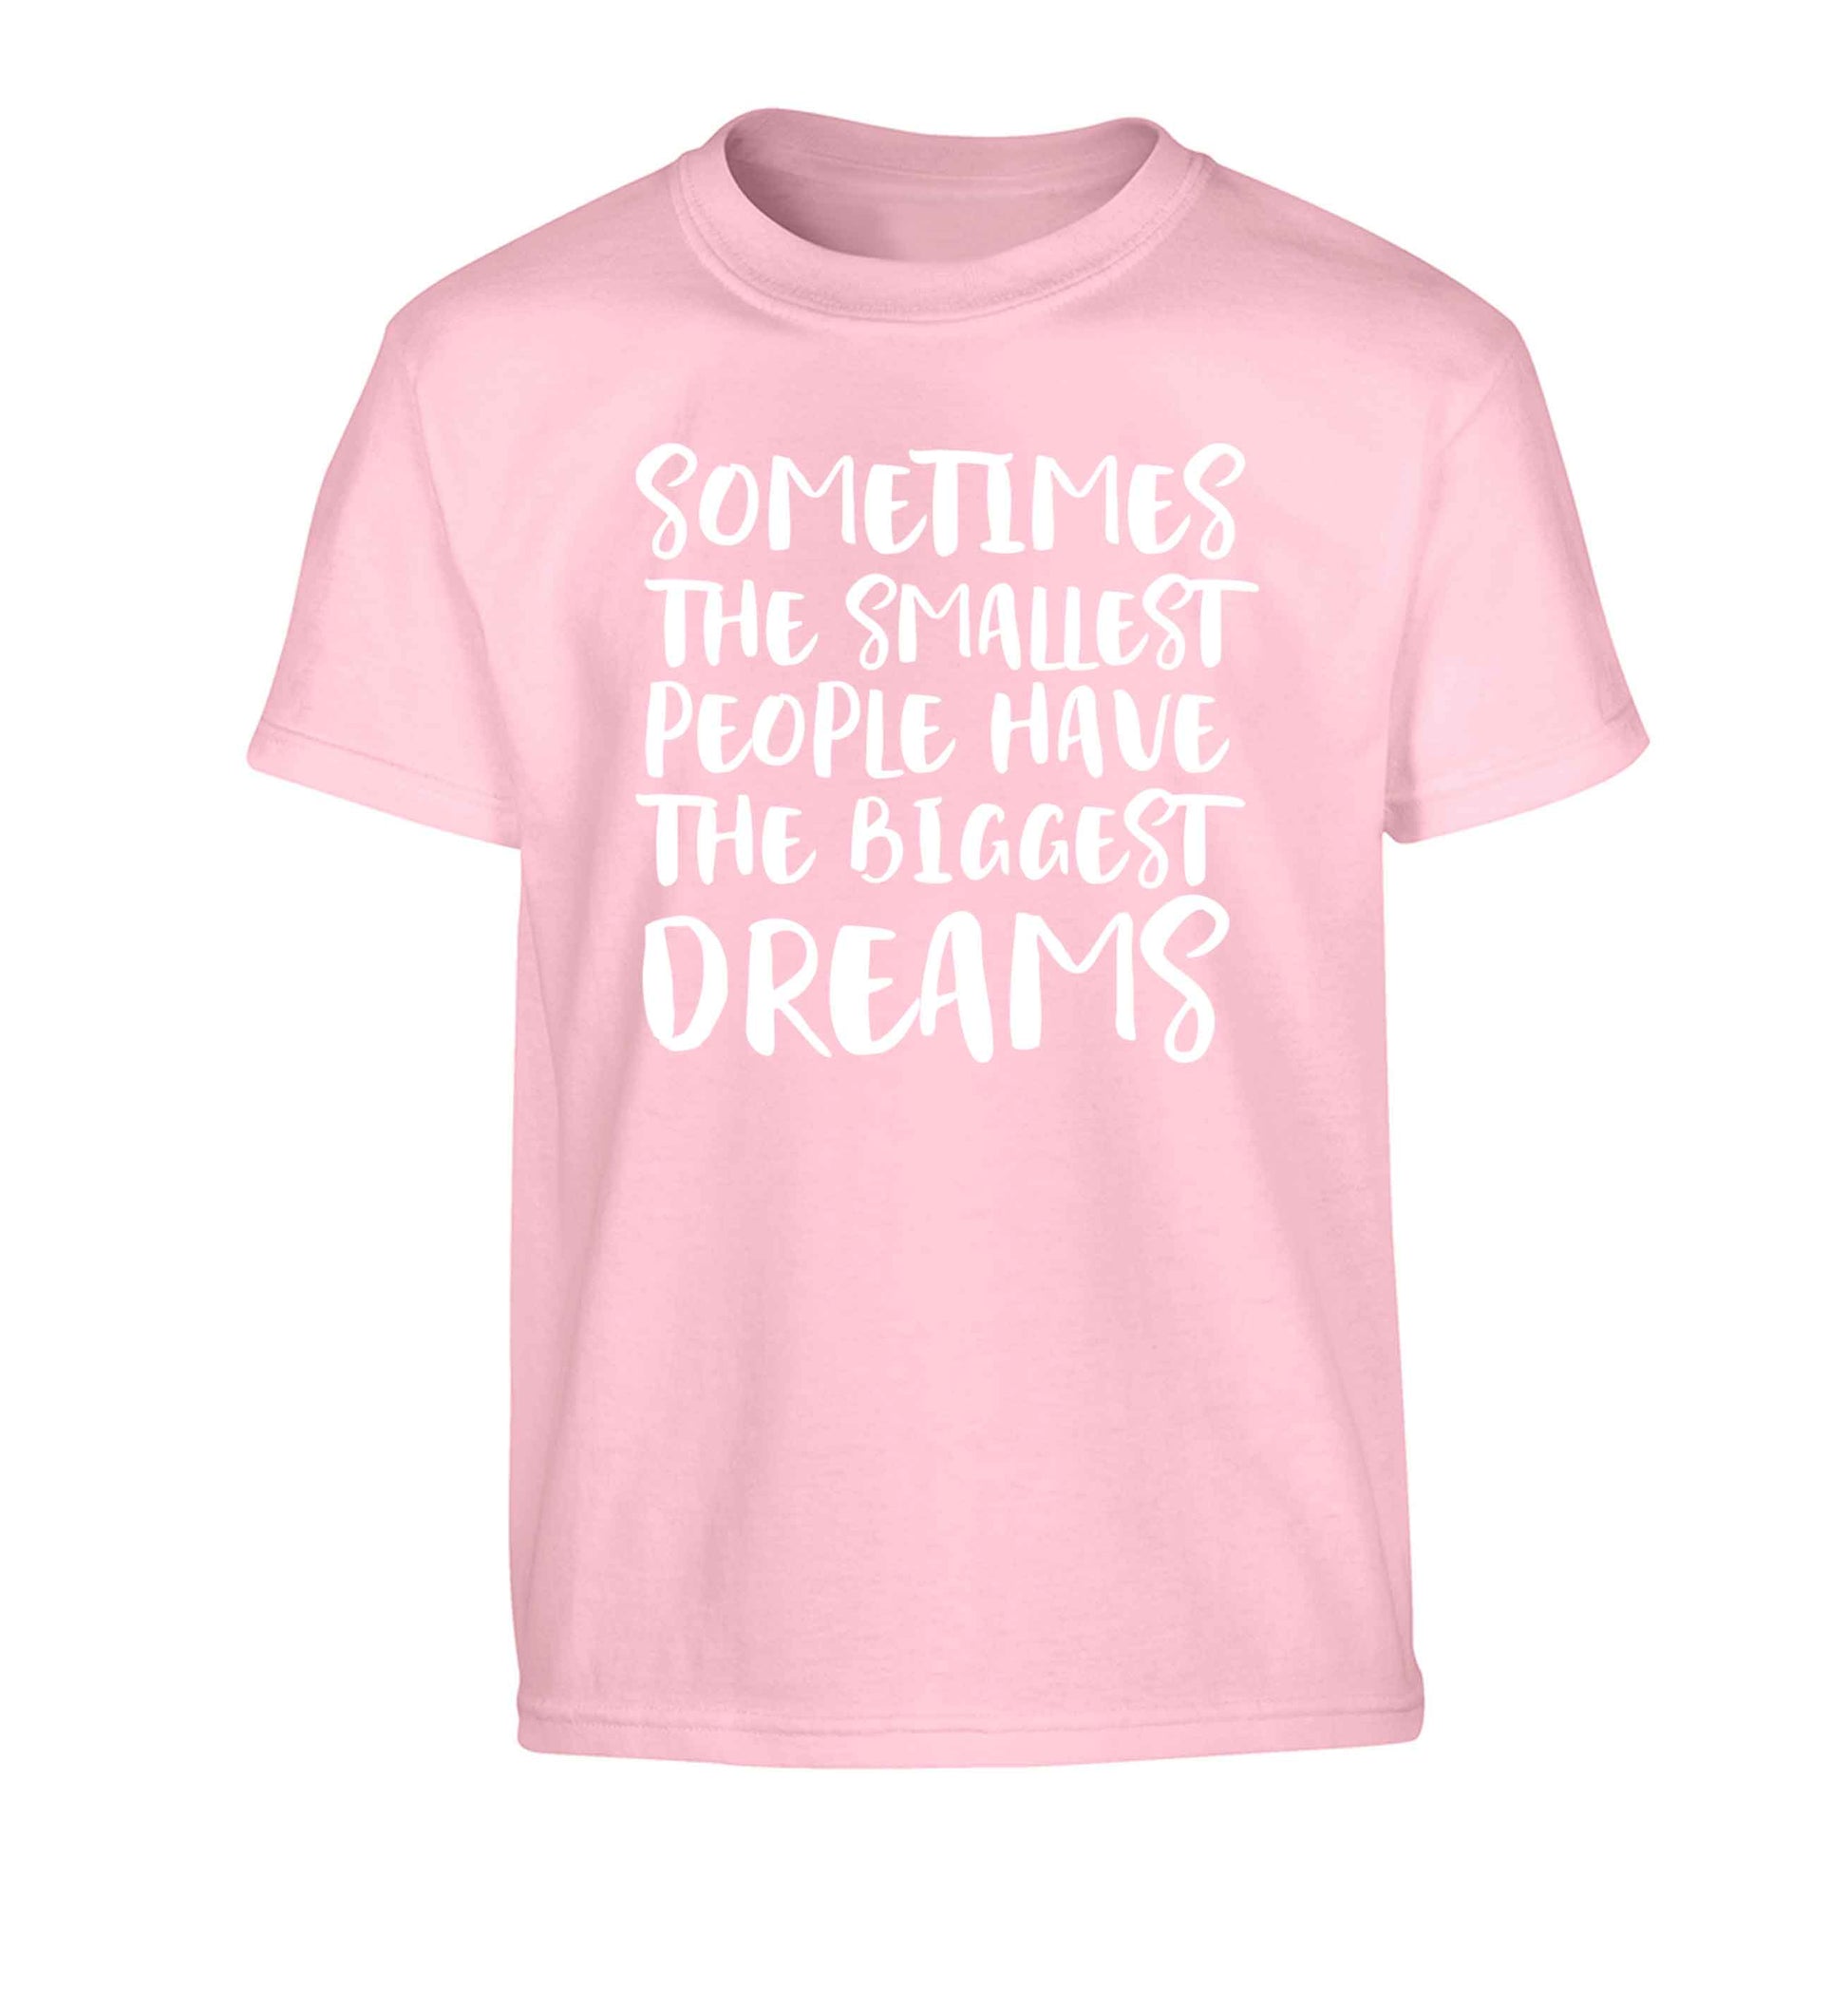 Sometimes the smallest people have the biggest dreams Children's light pink Tshirt 12-13 Years